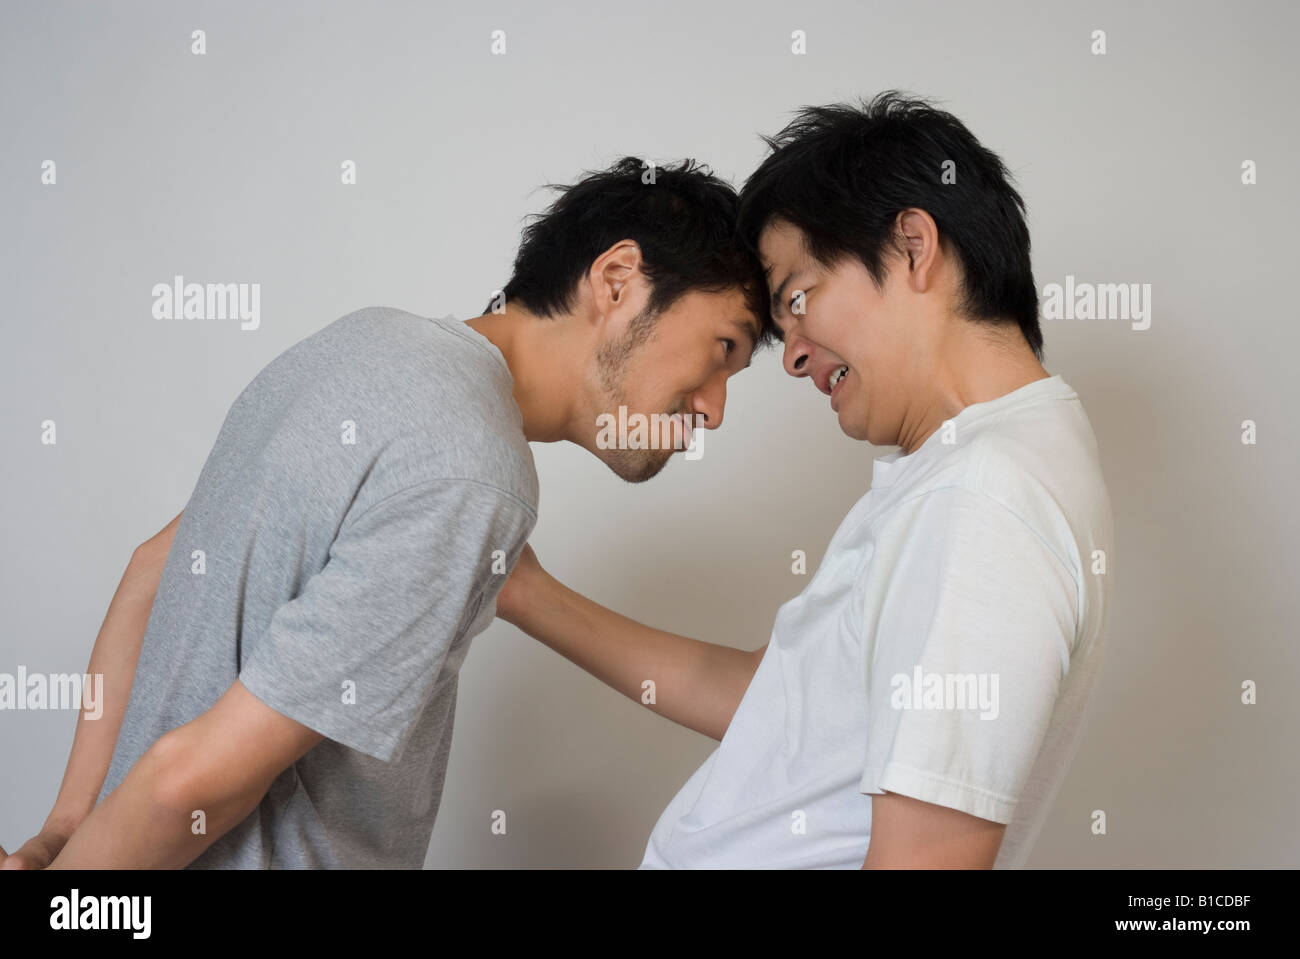 Two young men glaring Stock Photo